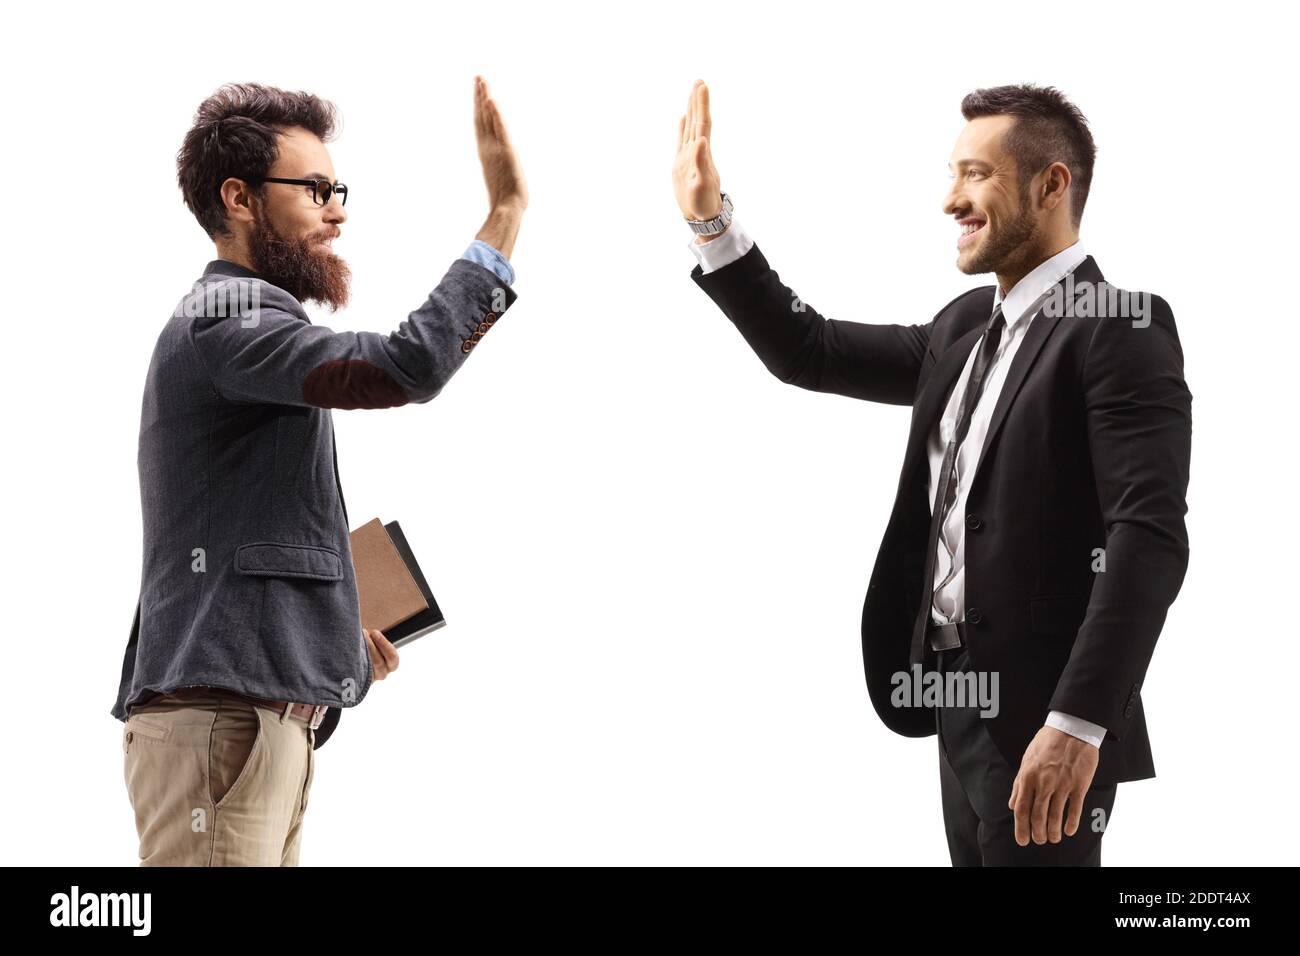 Men gesturing high-five isolated on white background Stock Photo